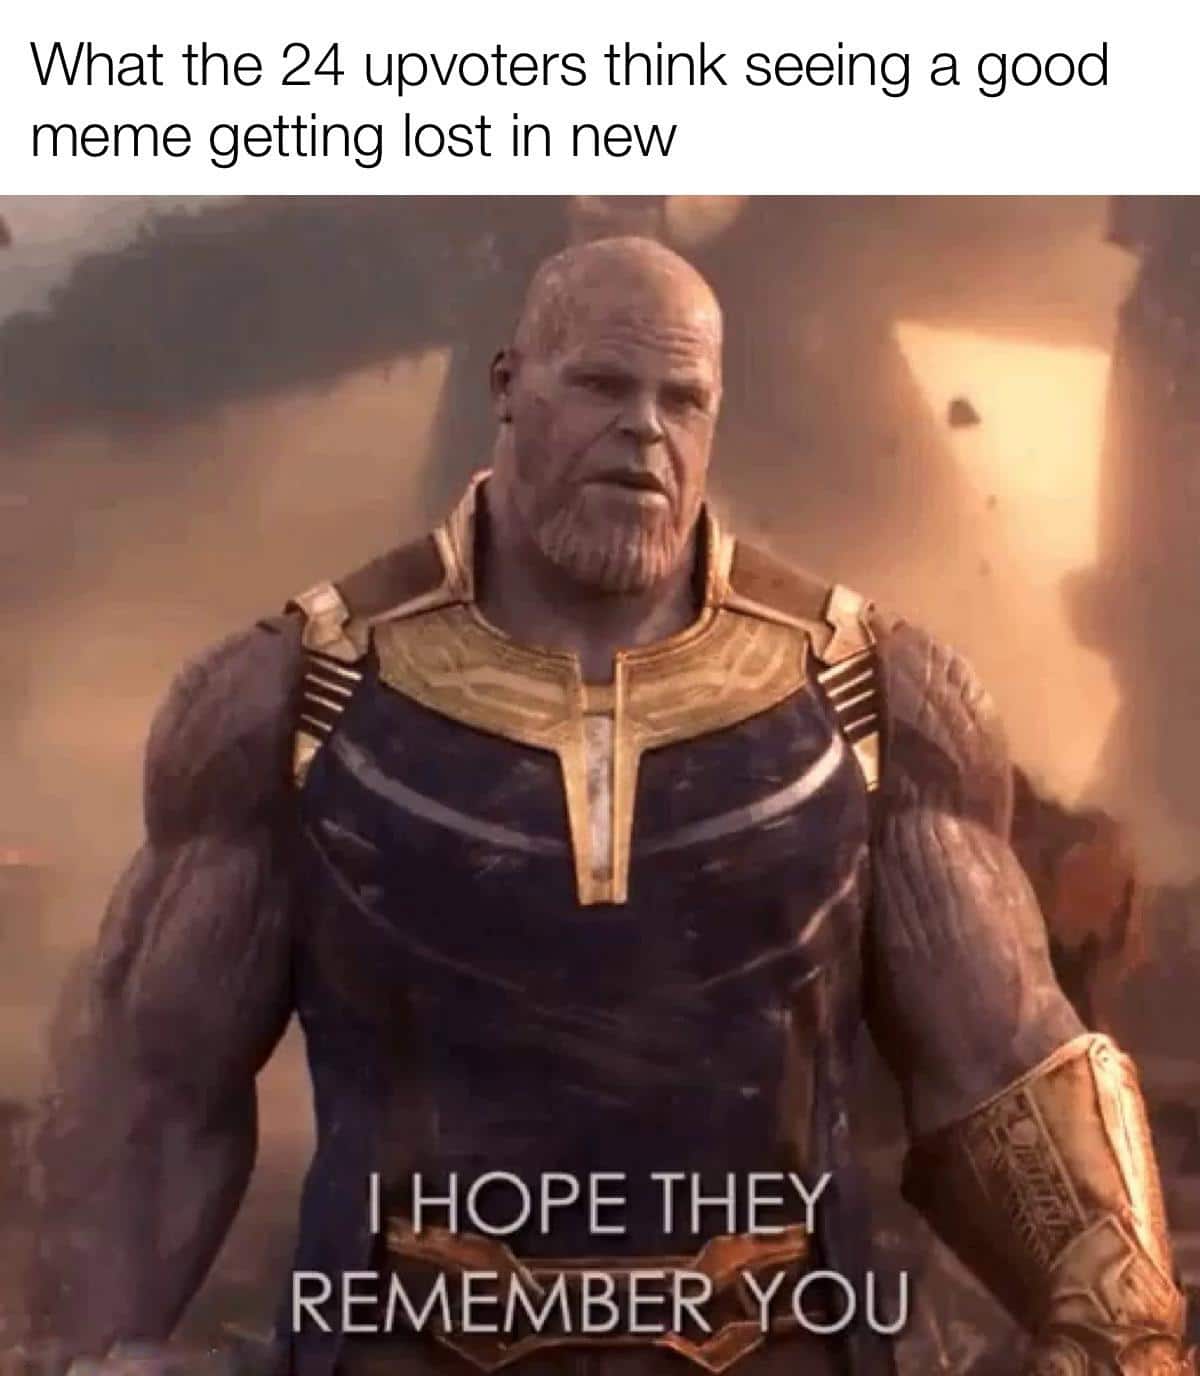 thanos avengers-memes thanos text: What the 24 upvoters think seeing a good meme getting lost in new I HOPE THEY REMEMBEVOU 